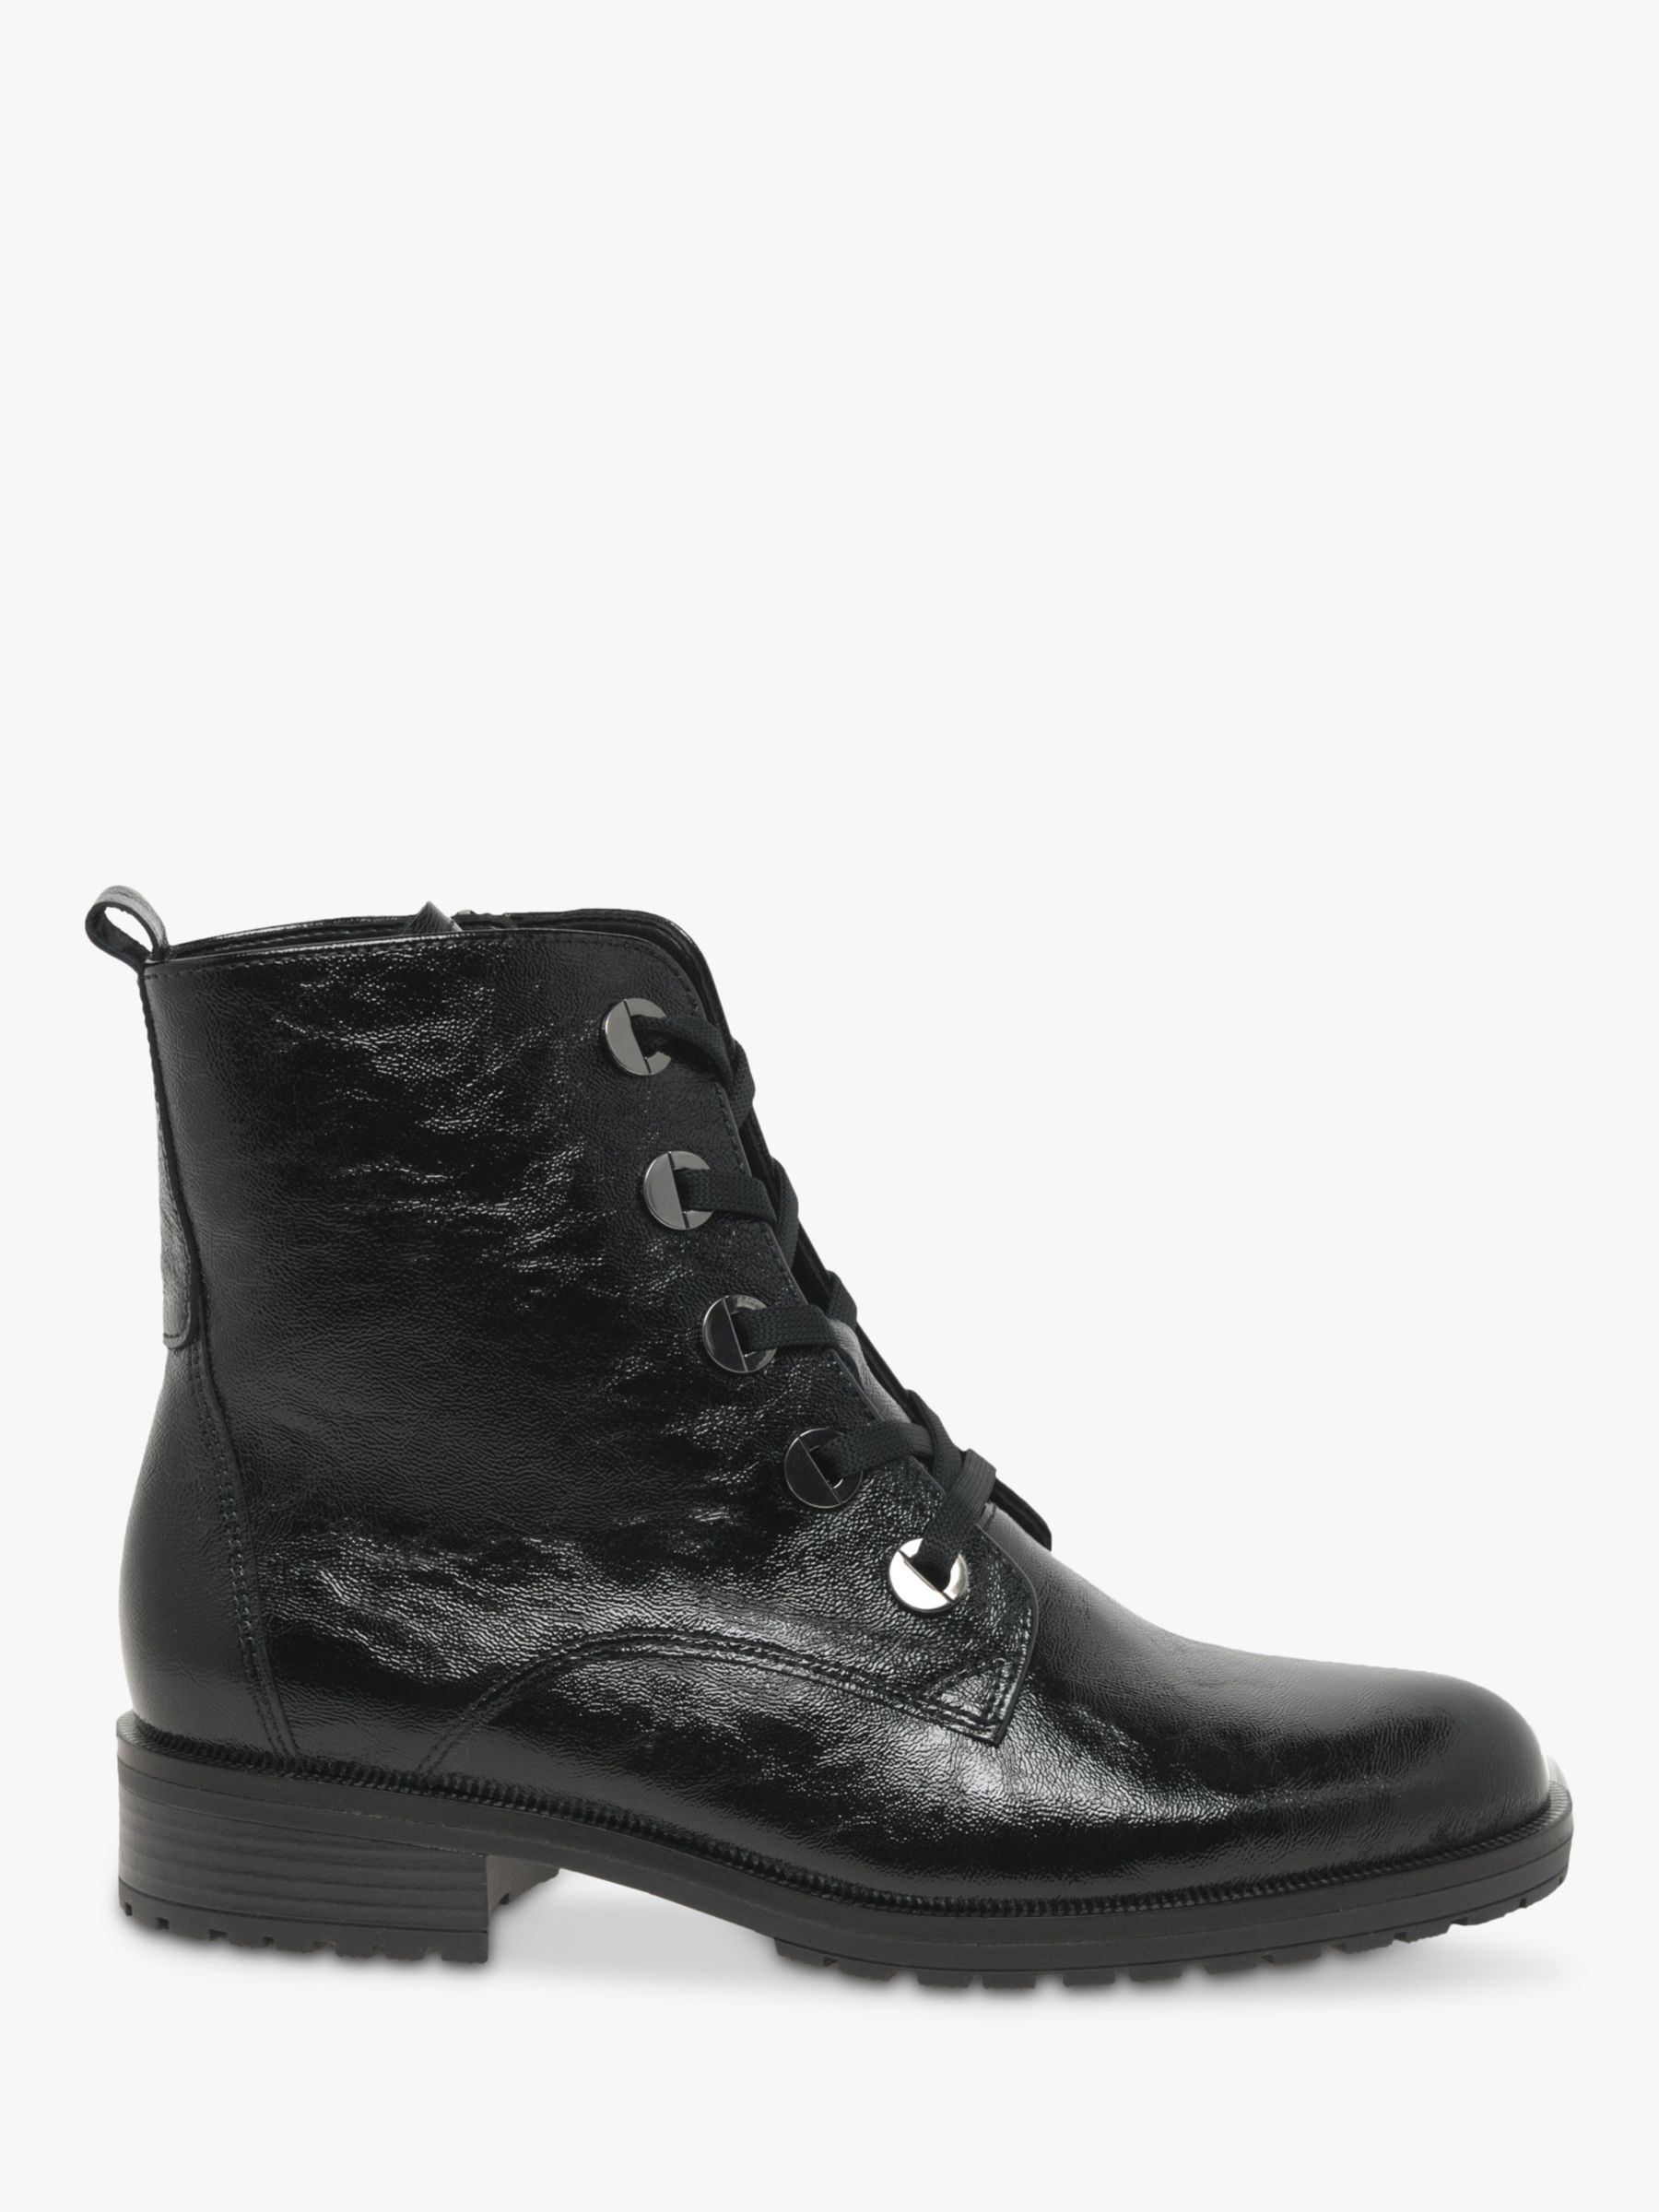 Gabor Prissie Wide Fit Leather Up Boots, Black at John Lewis & Partners